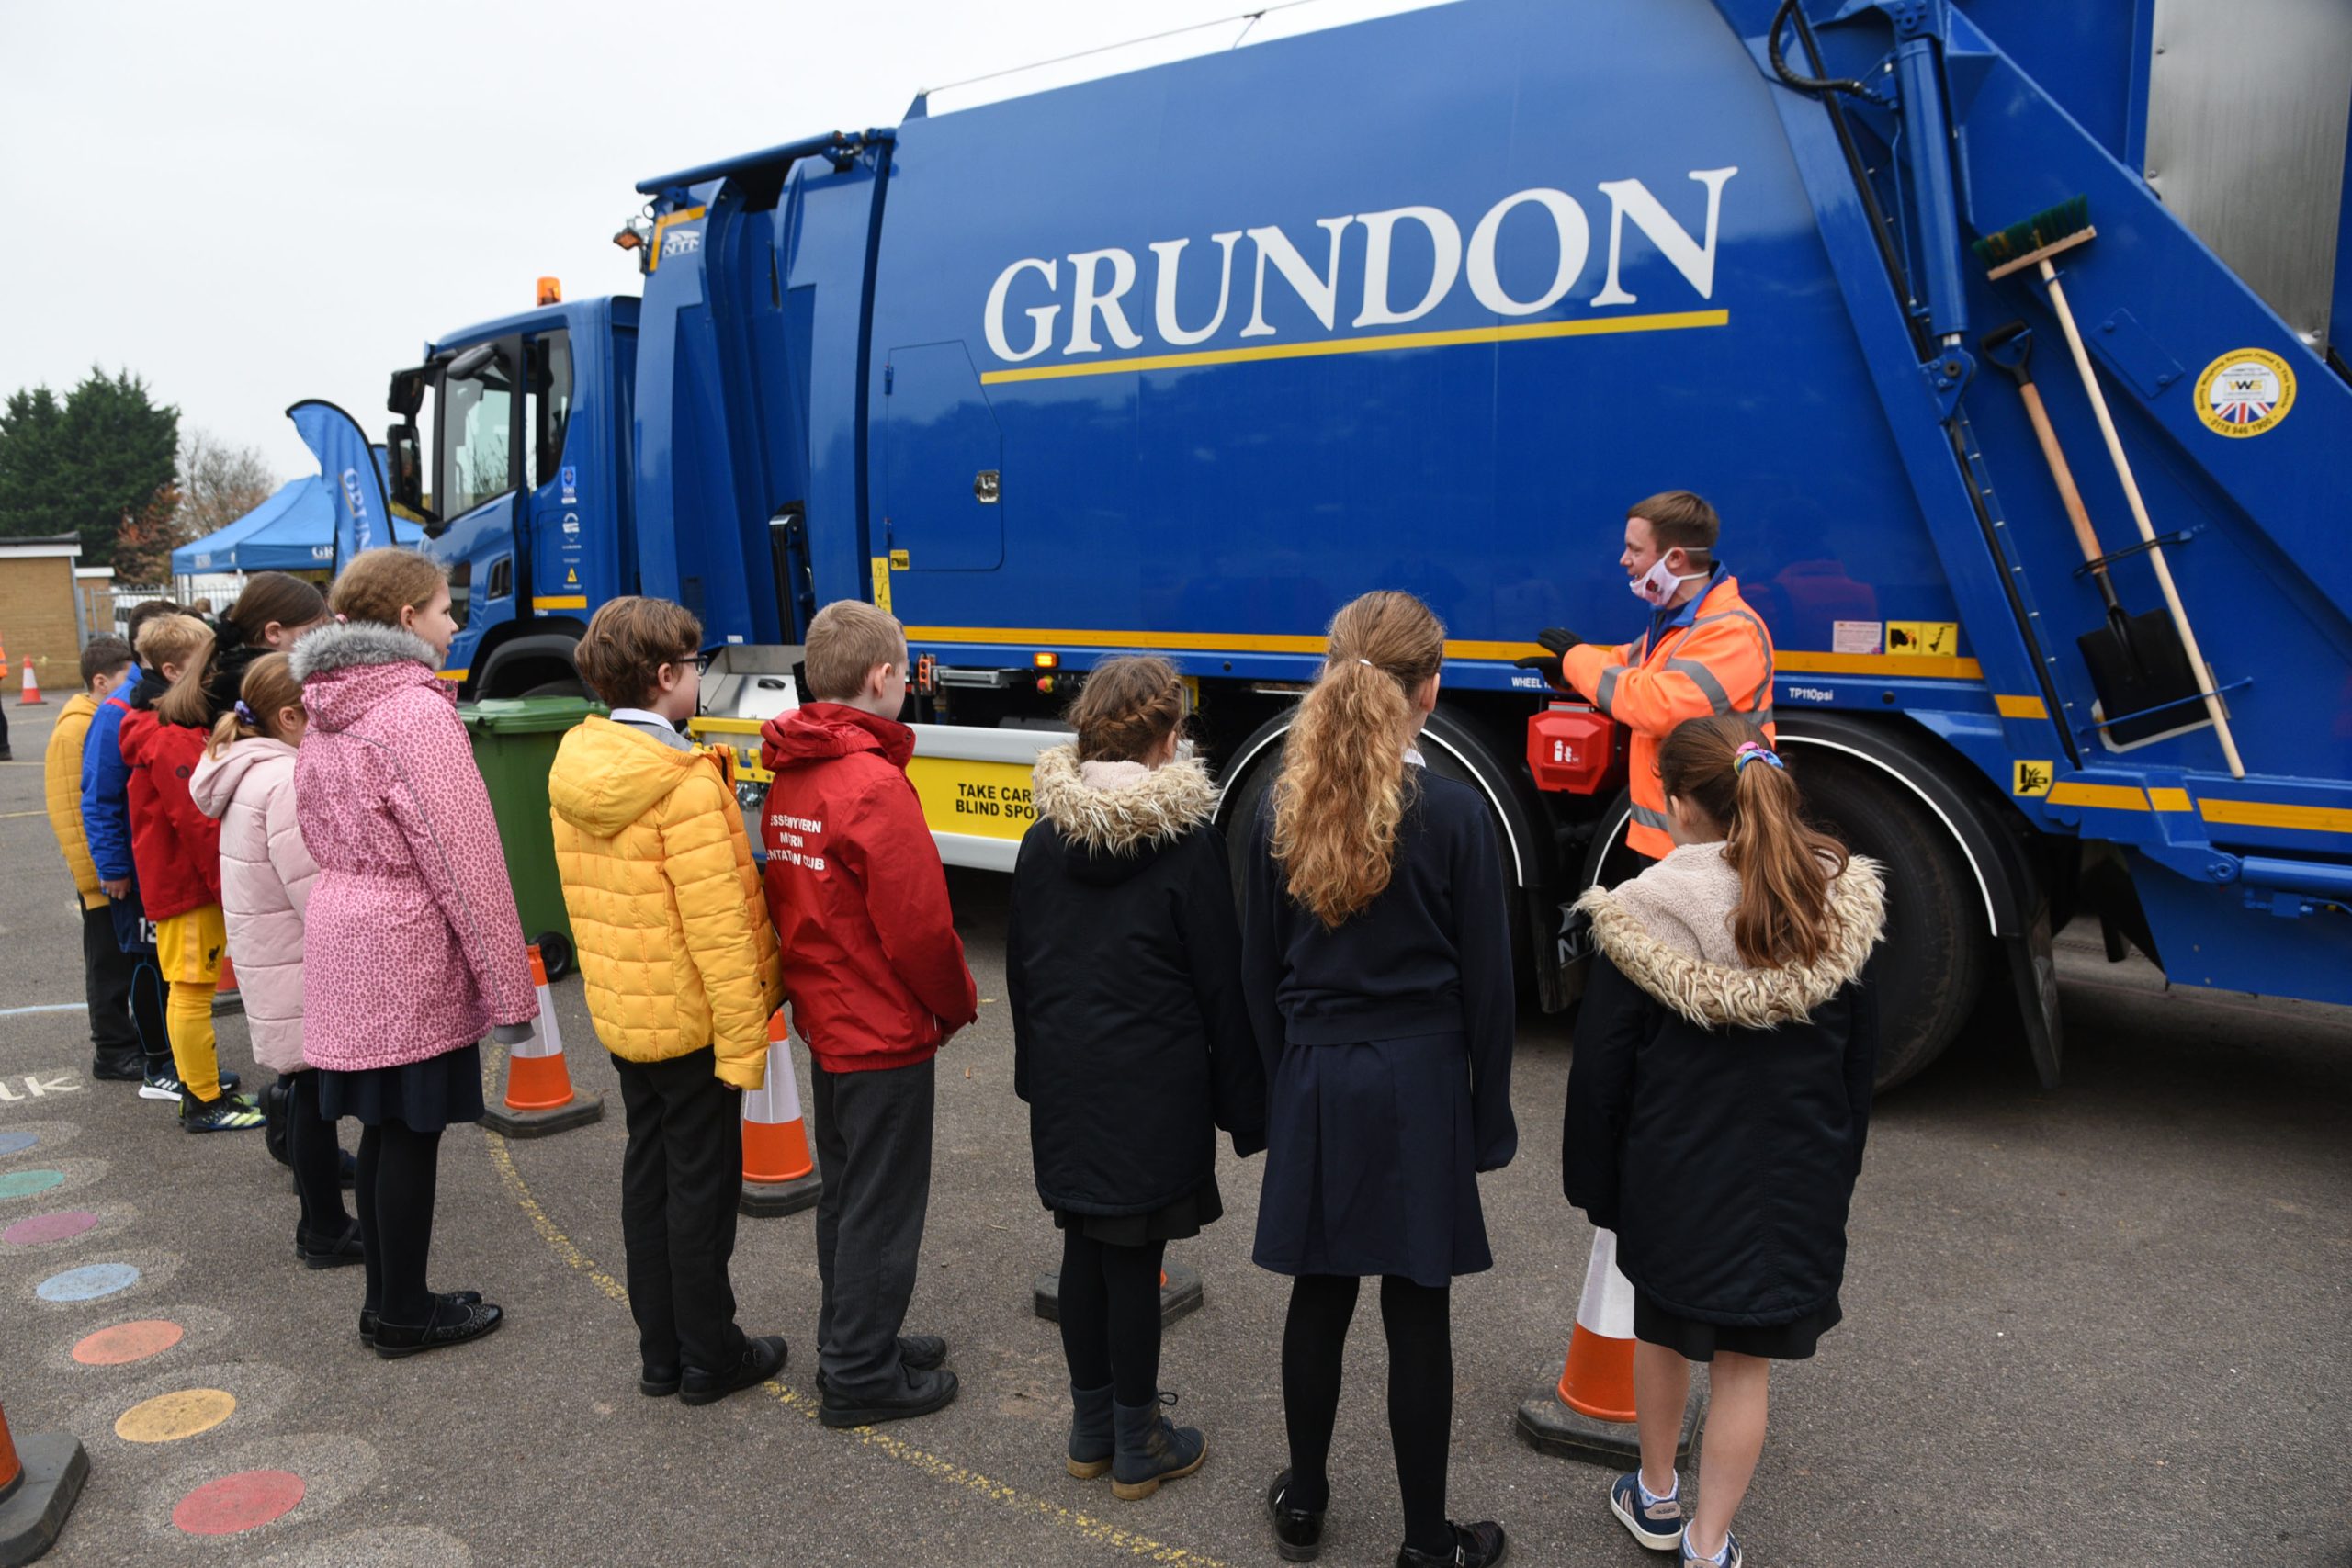 Paul Colling, Transport Trainer at Grundon explains some of the vehicle's safety features to pupils in Newbury